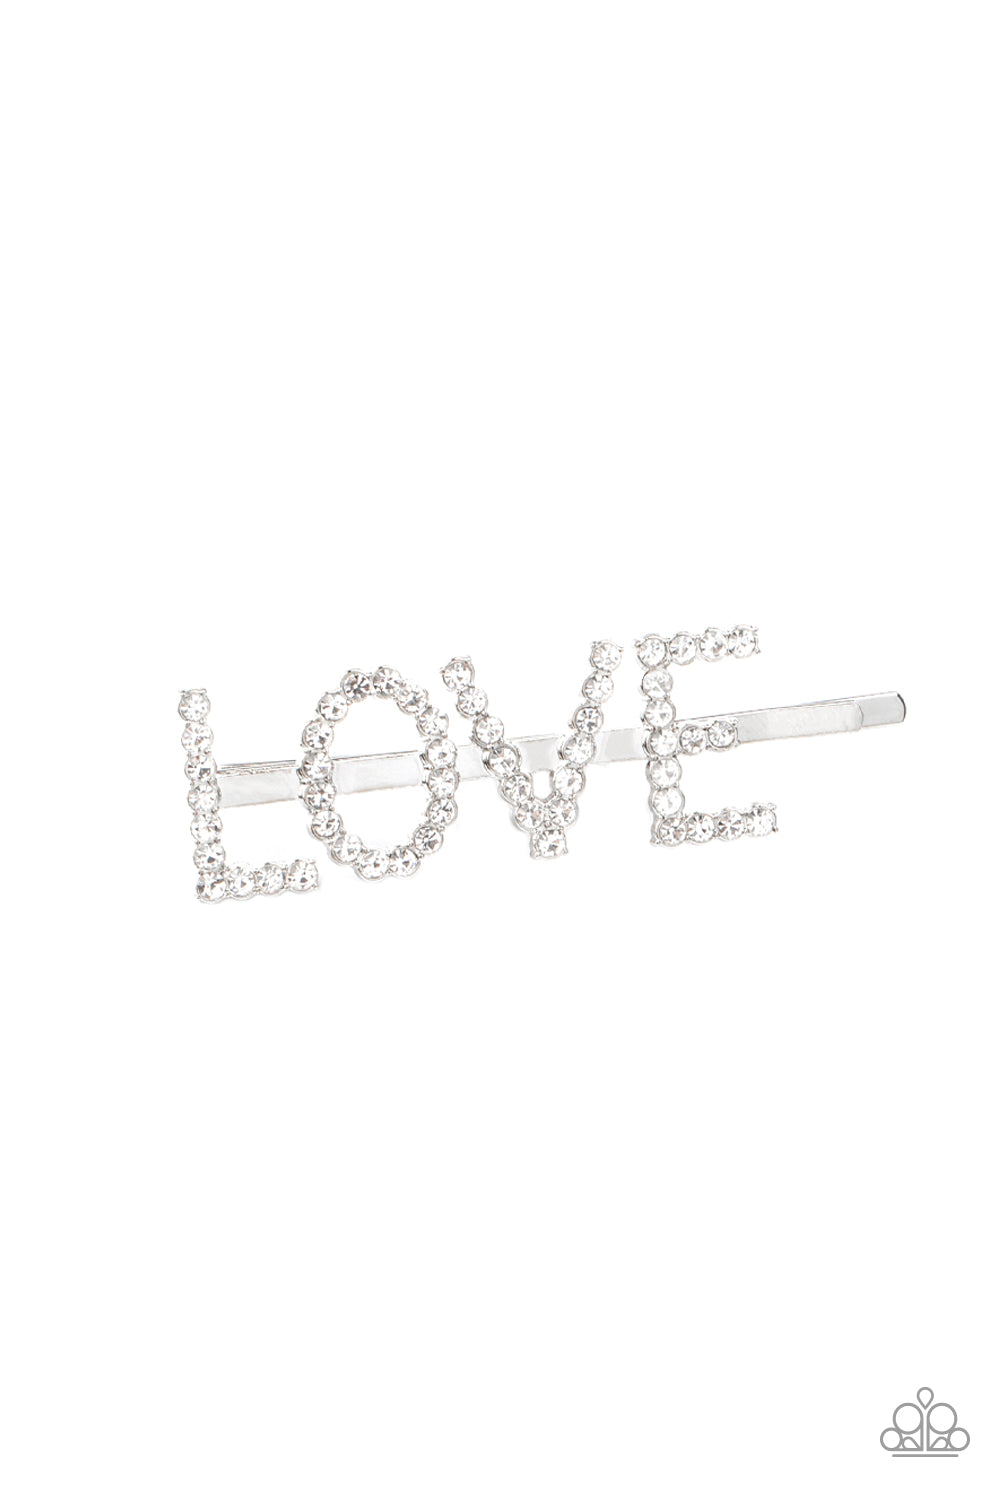 All You Need Is Love - White - Bobby Pin